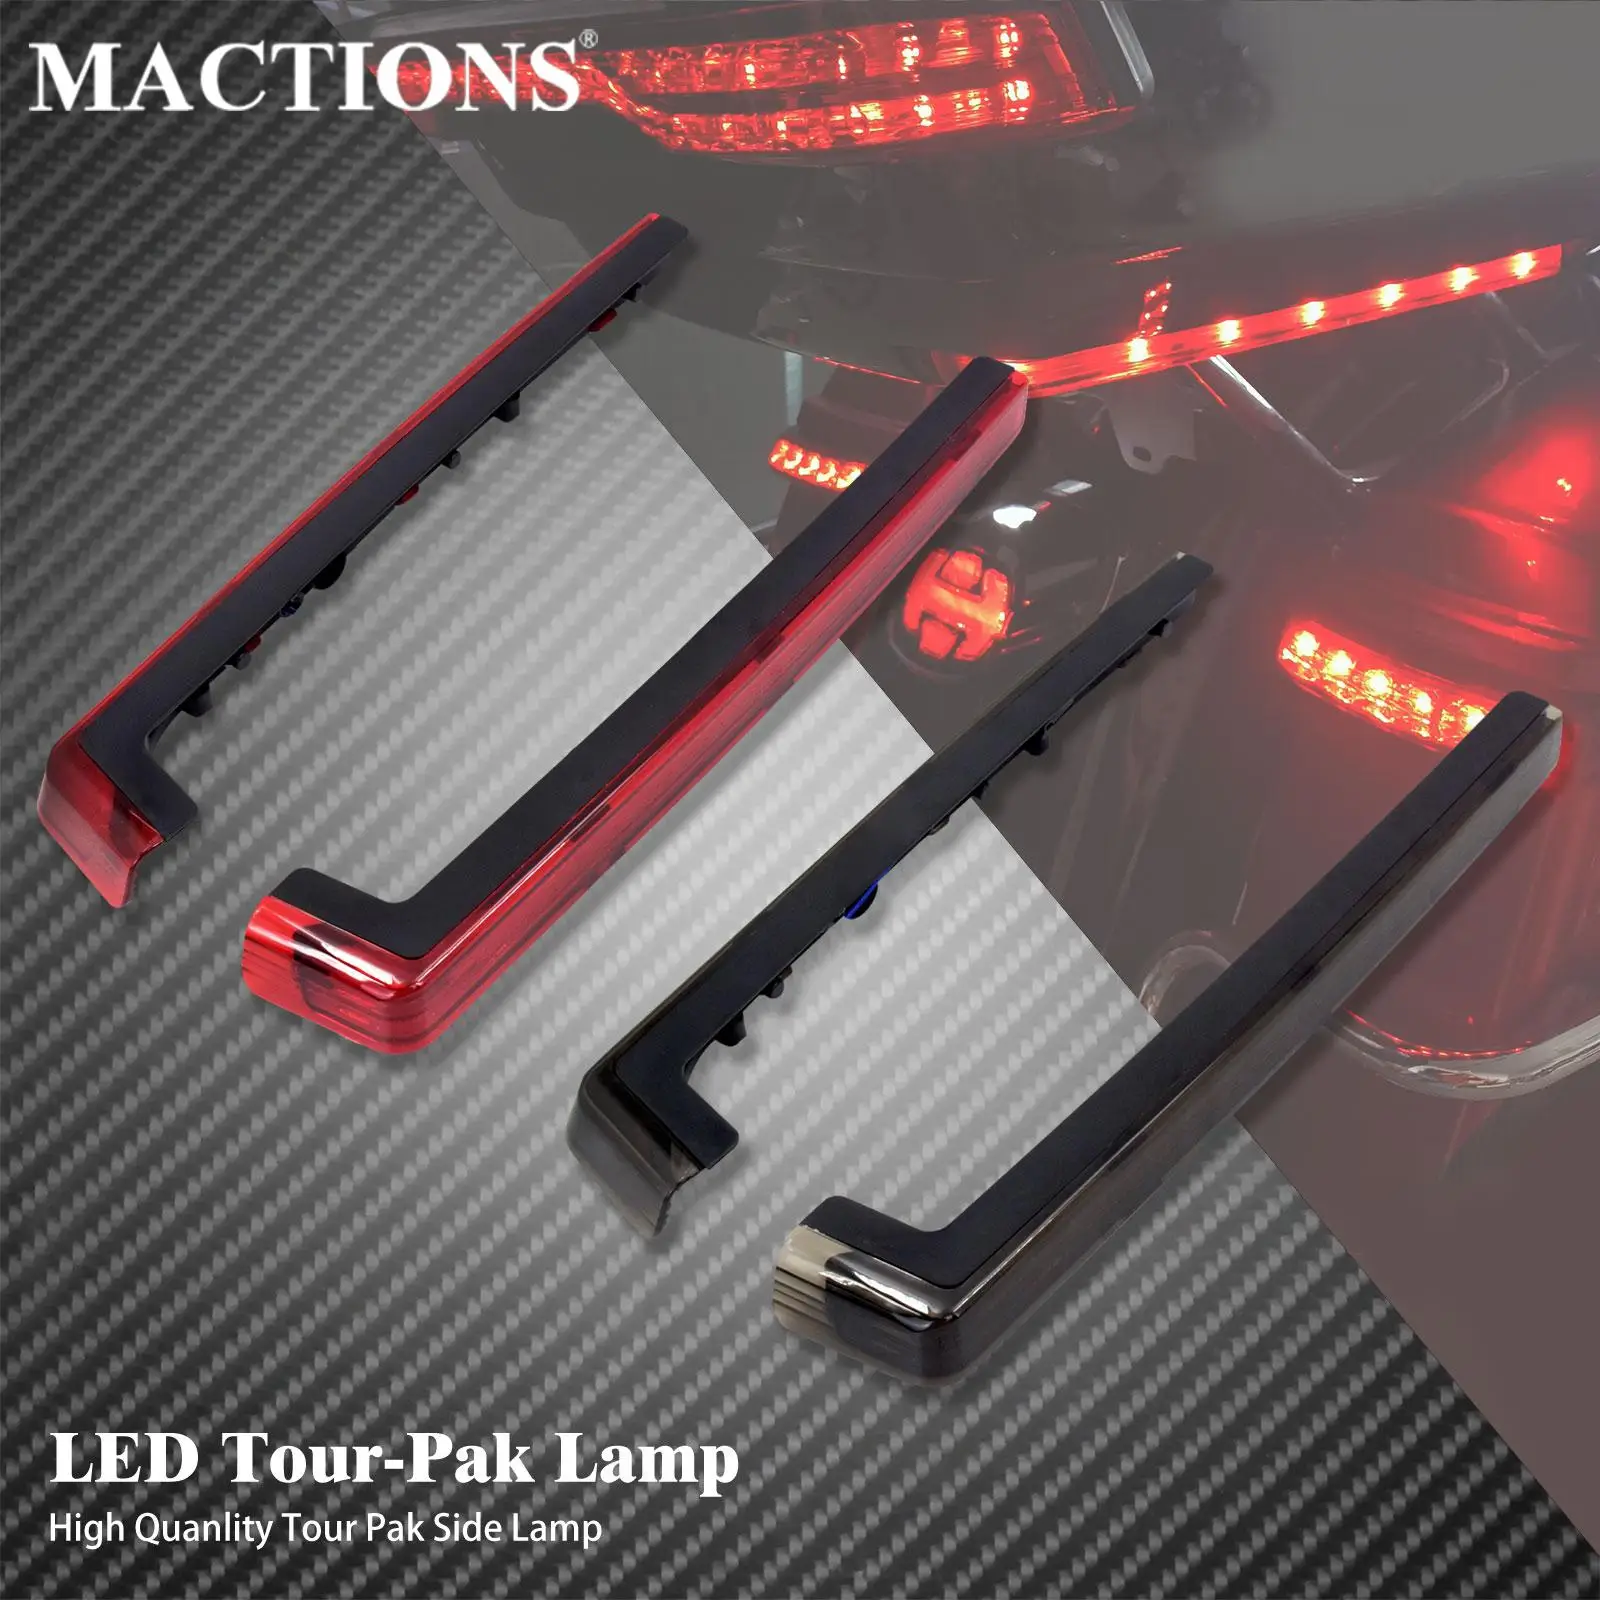 

Motorcycle Red/Smoke LED Tour Pak Pack Accent Side Panel Light For Harley Touring FLHR FLHX Road King Street Road Glide 2006-Up